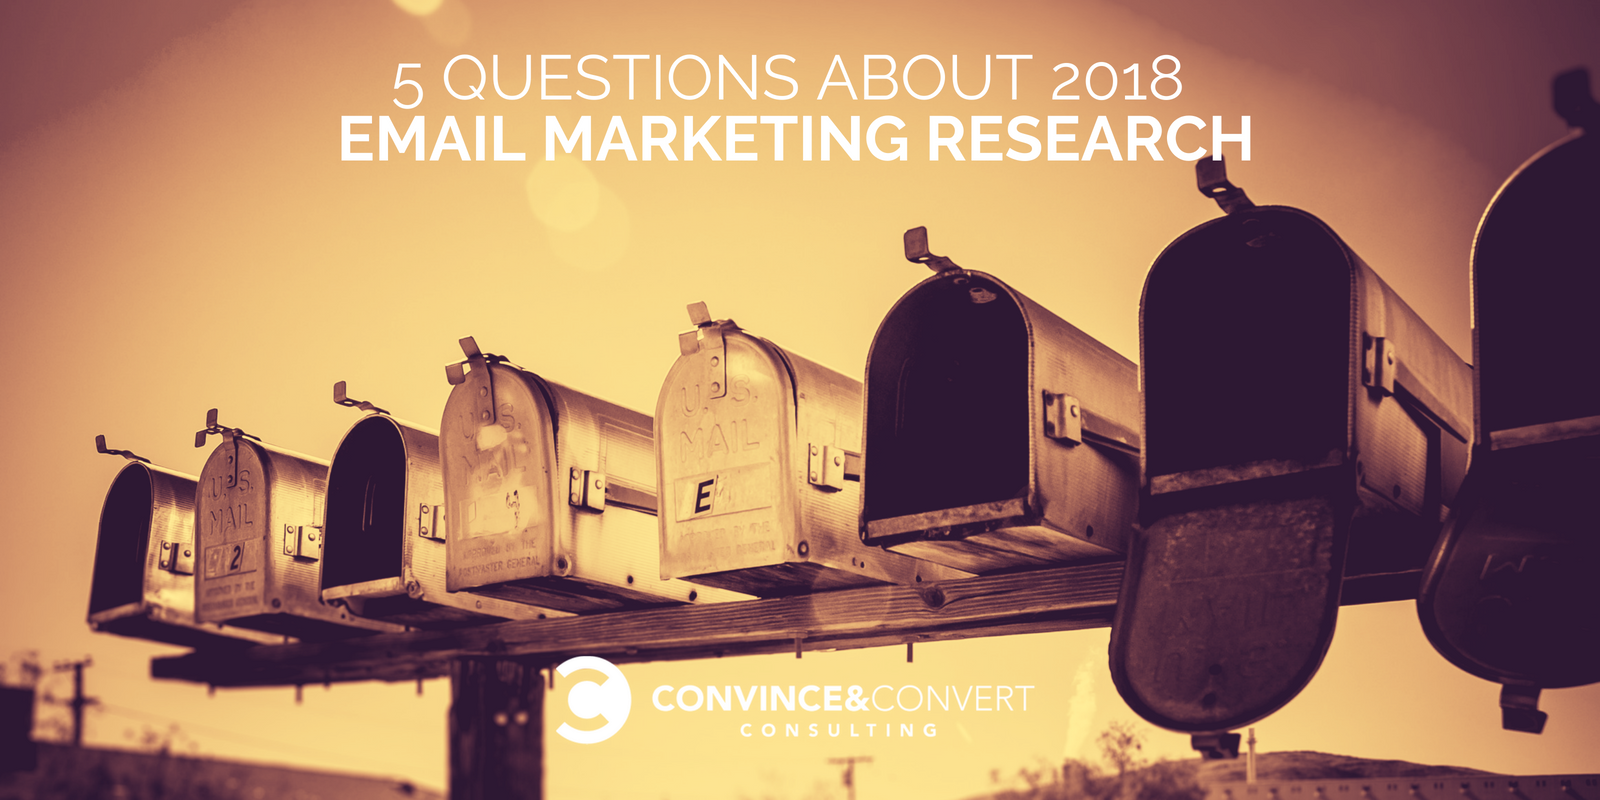 2018 email marketing research